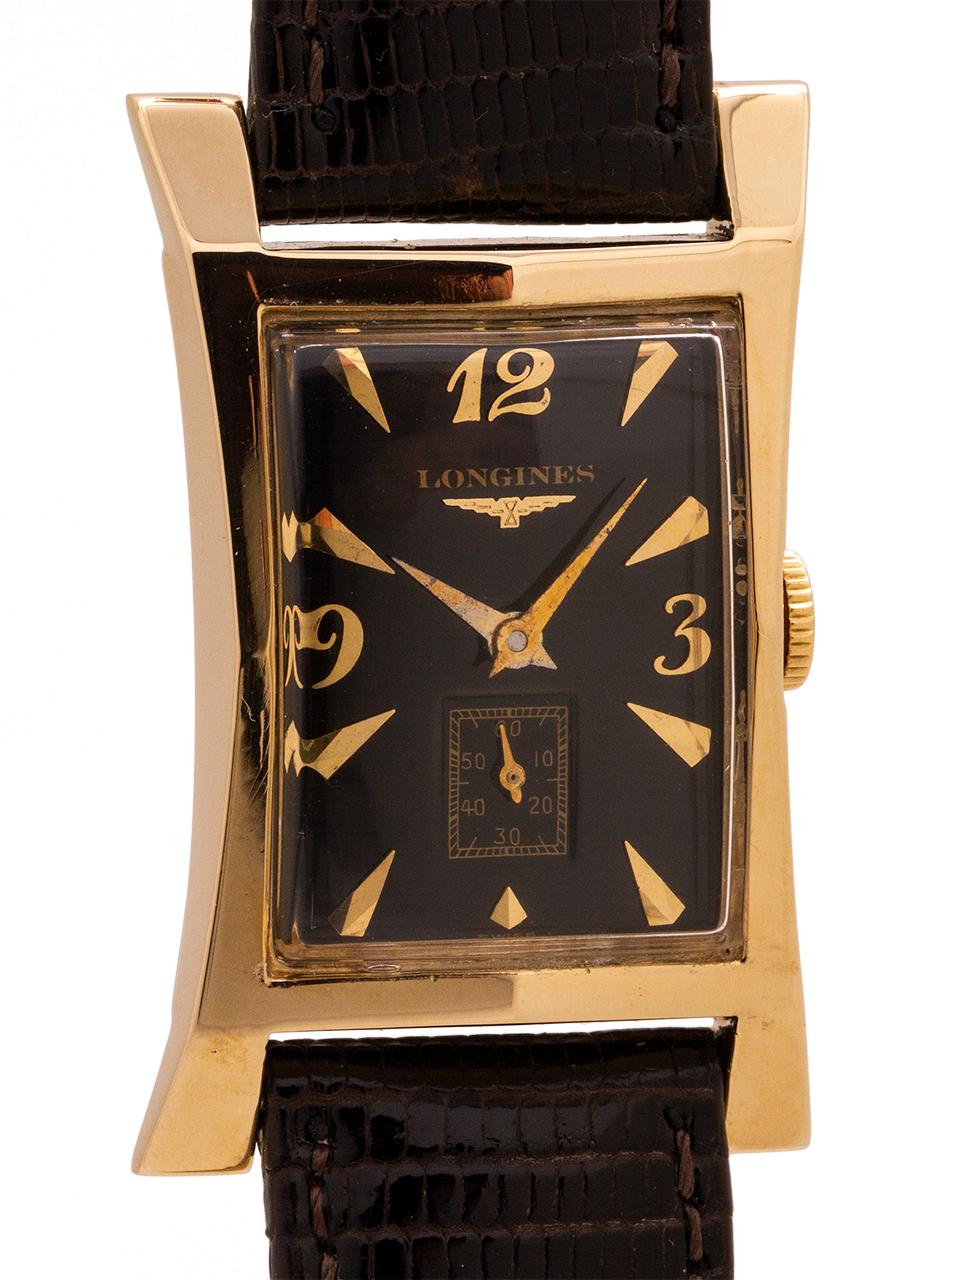 
Longines 14K YG  elongated hour glass shaped case measuring 21mm at its narrowest, 27mm at its widest and 41mm lug to lug. Scarce vintage model in exceptional condition. With beautifully restored gloss black dial with gold raised indexes and gold